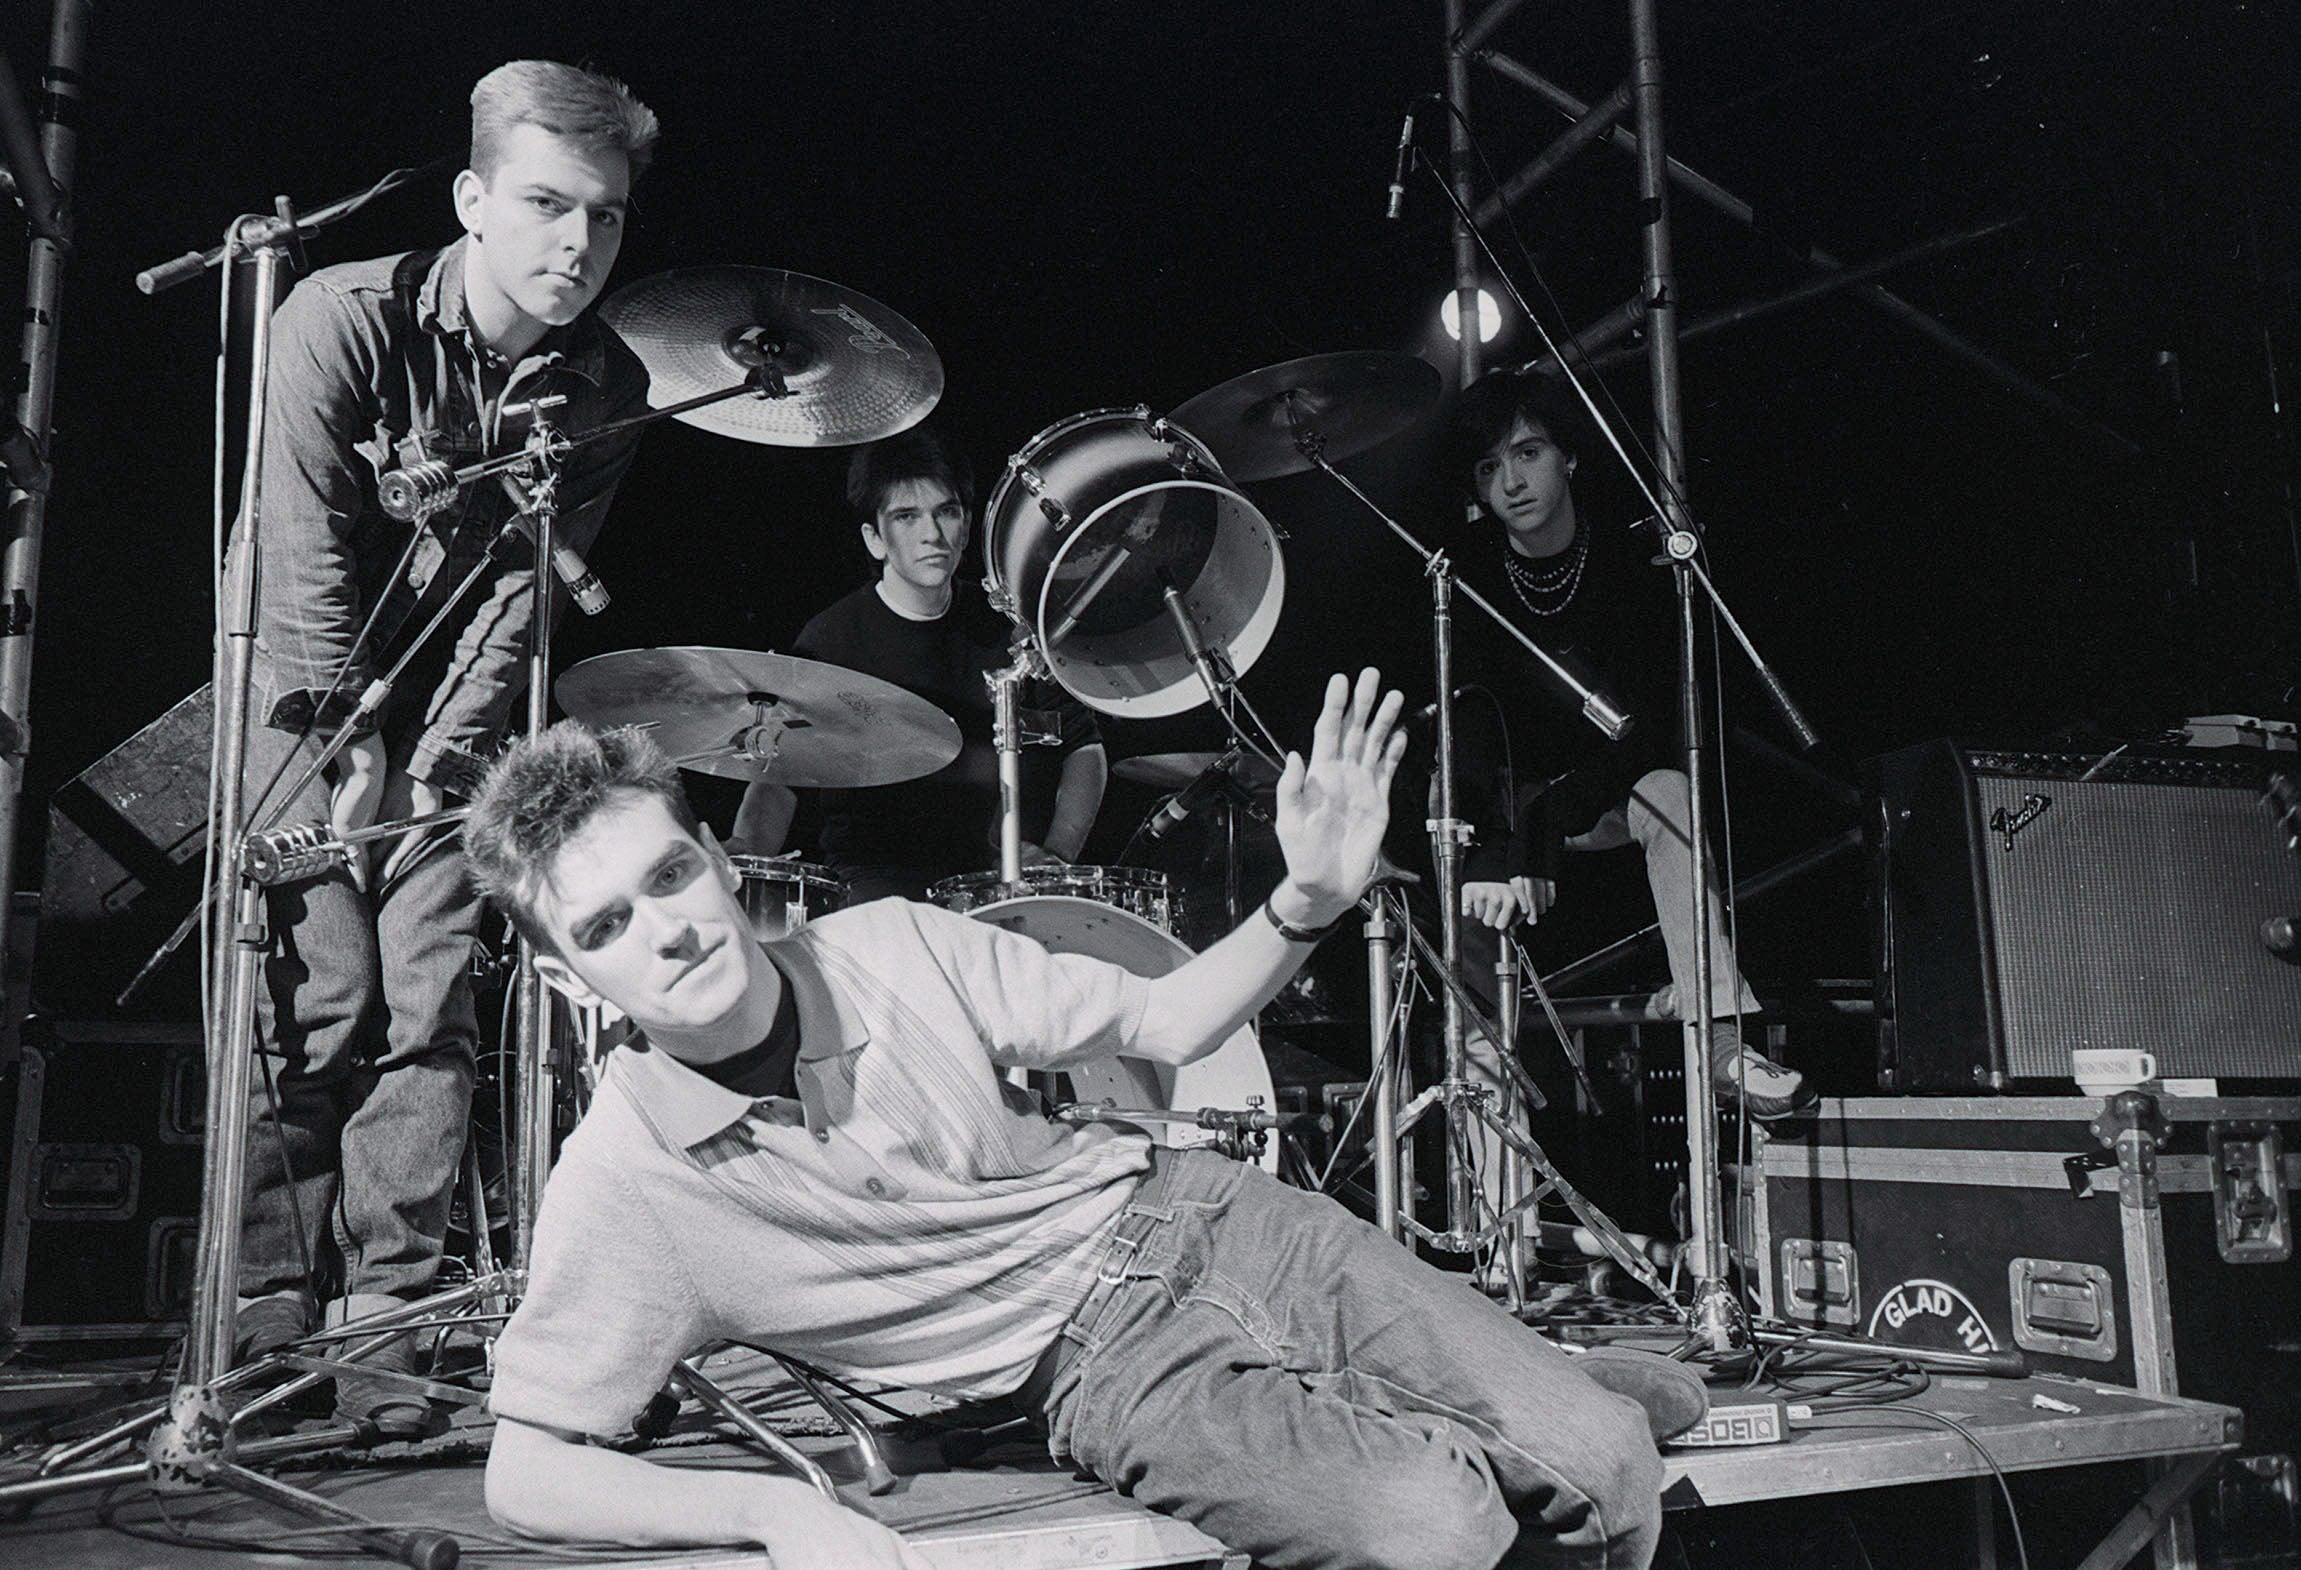 The Smiths were quickly adopted as the darlings of the music press